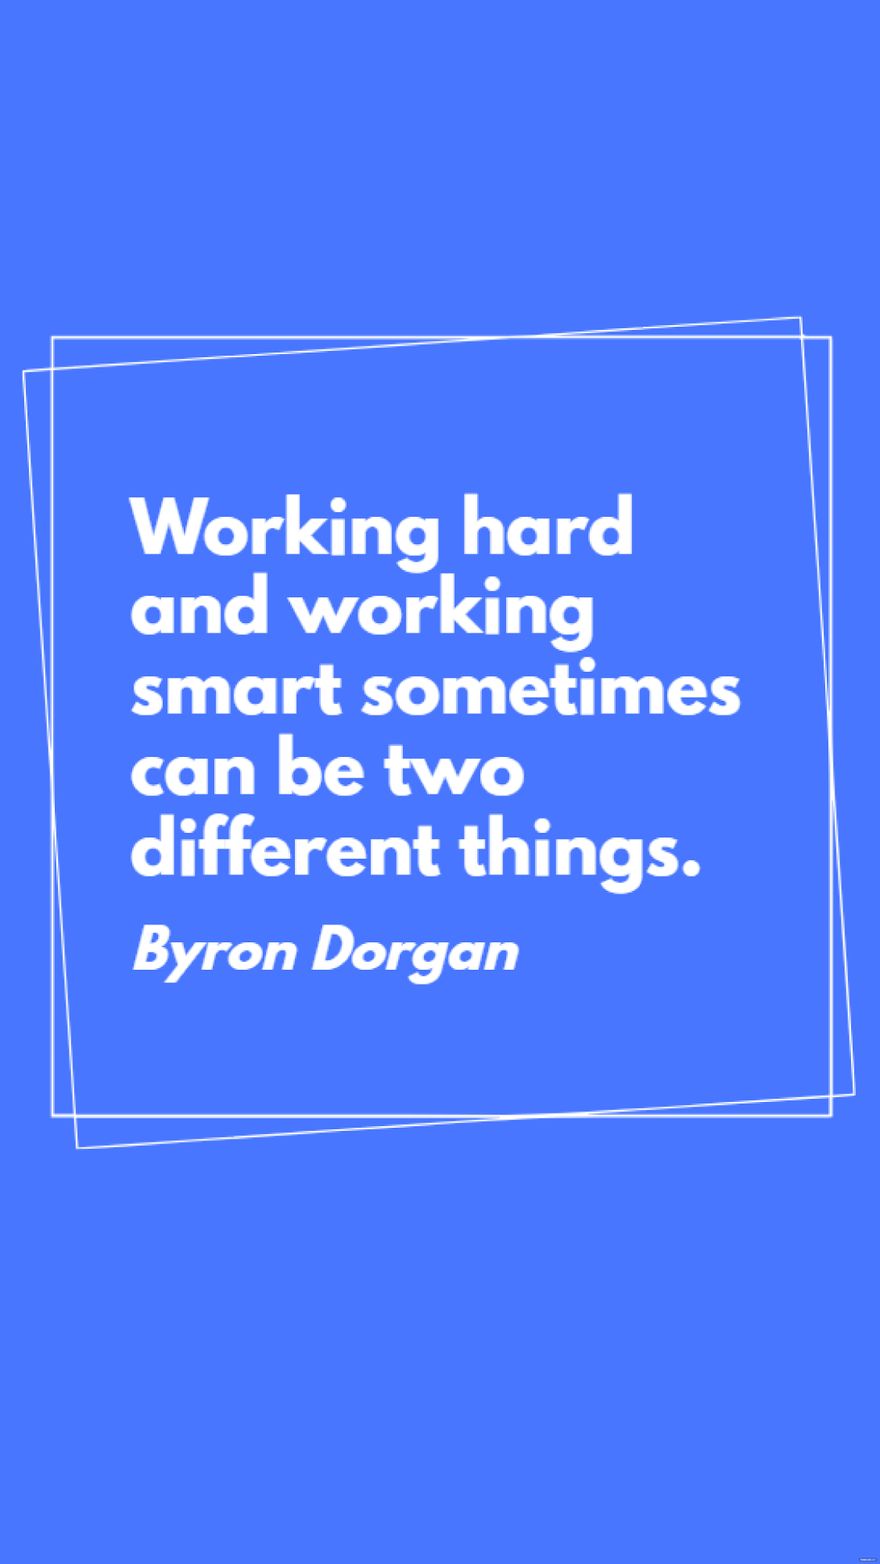 Byron Dorgan - Working hard and working smart sometimes can be two different things.